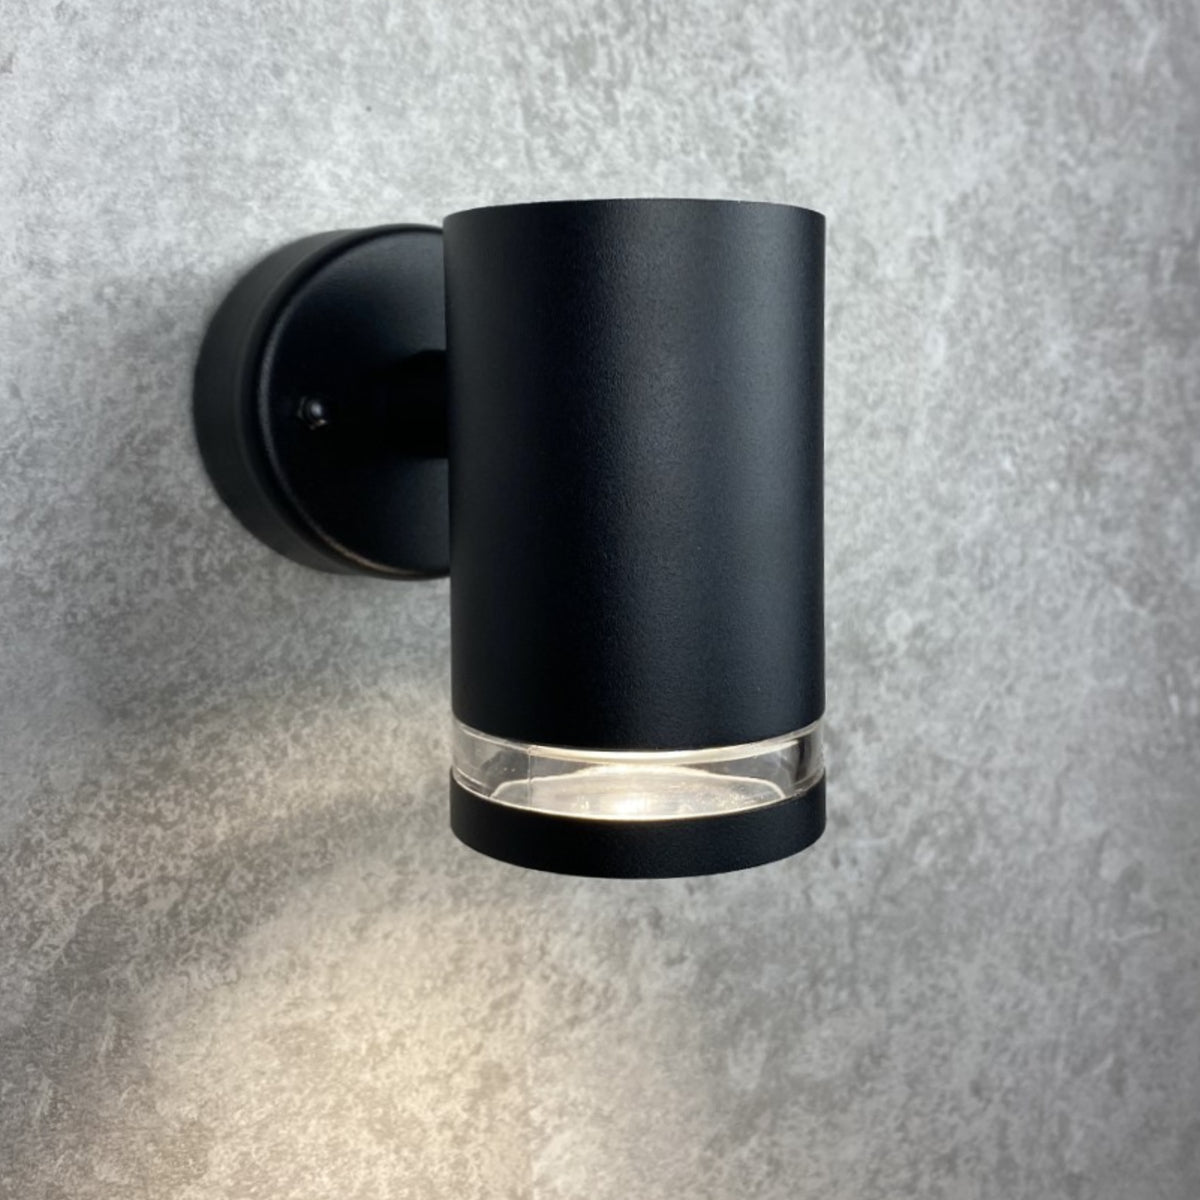 Our Jennifer black outdoor wall mounted cylinder outdoor light would look perfect in a modern or more traditional home design. Outside wall lights can provide atmospheric light in your garden, at the front door or on the terrace as well as a great security solution. It is designed for durability and longevity with its robust material producing a fully weatherproof and water resistant light fitting.